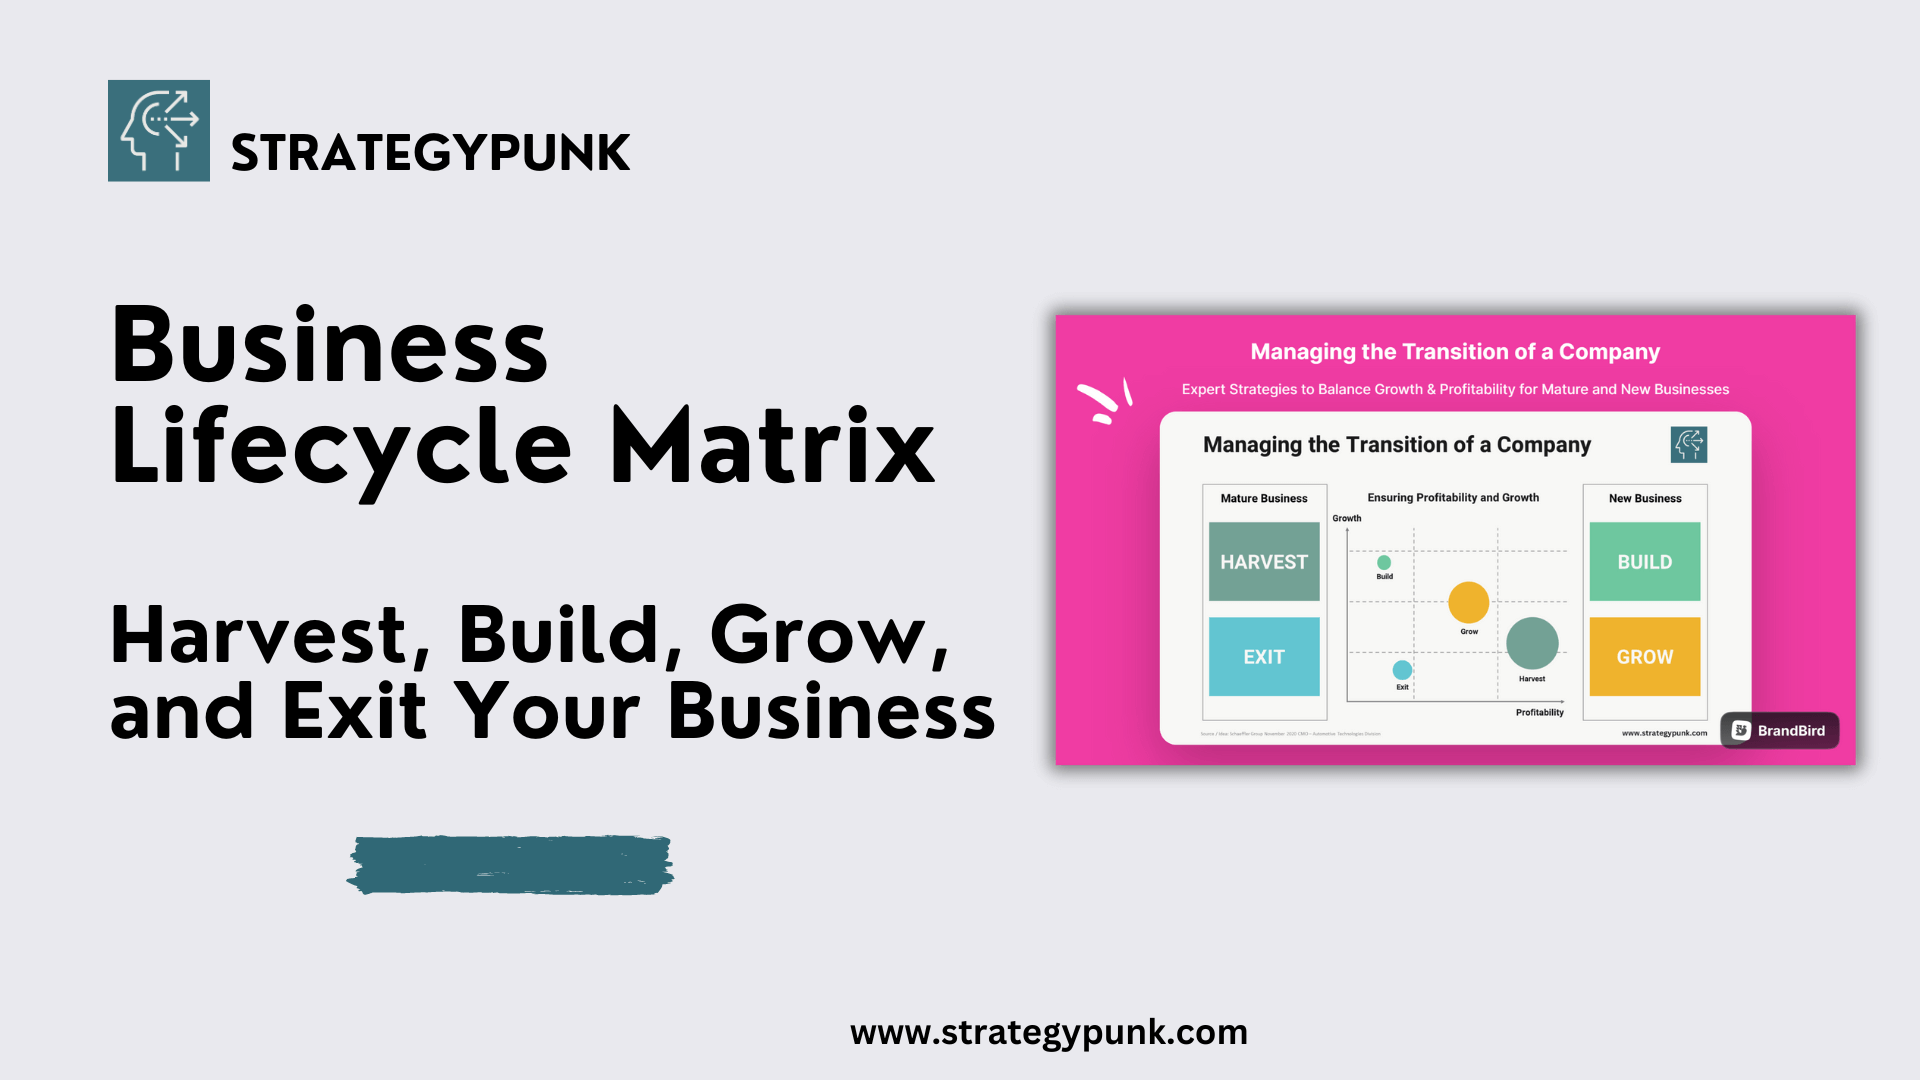 The Business Lifecycle Matrix: A Guide to Harvest, Build, Grow, and Exit Your Business